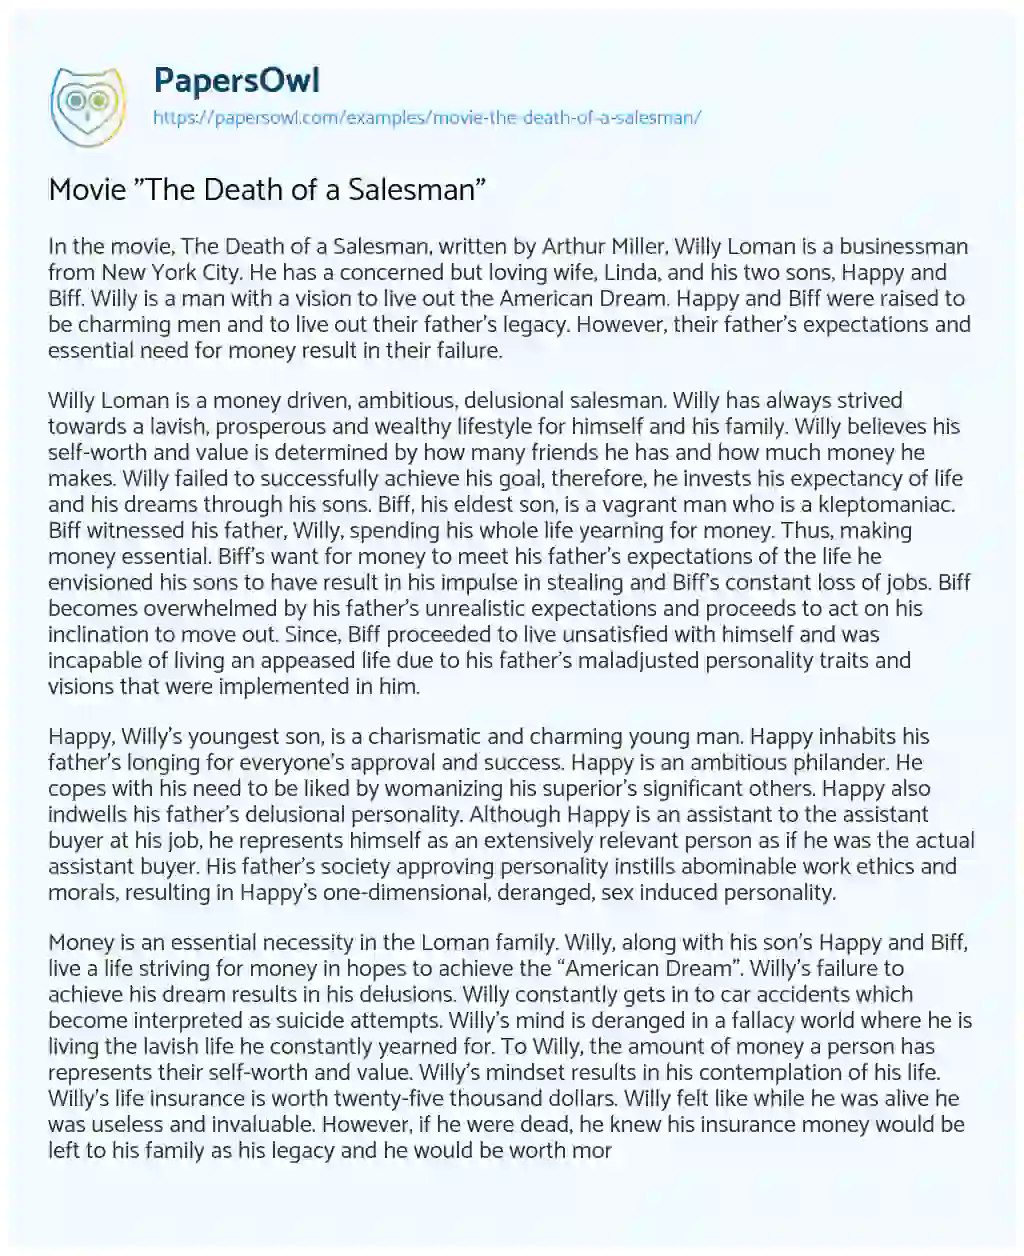 Essay on Movie “The Death of a Salesman”